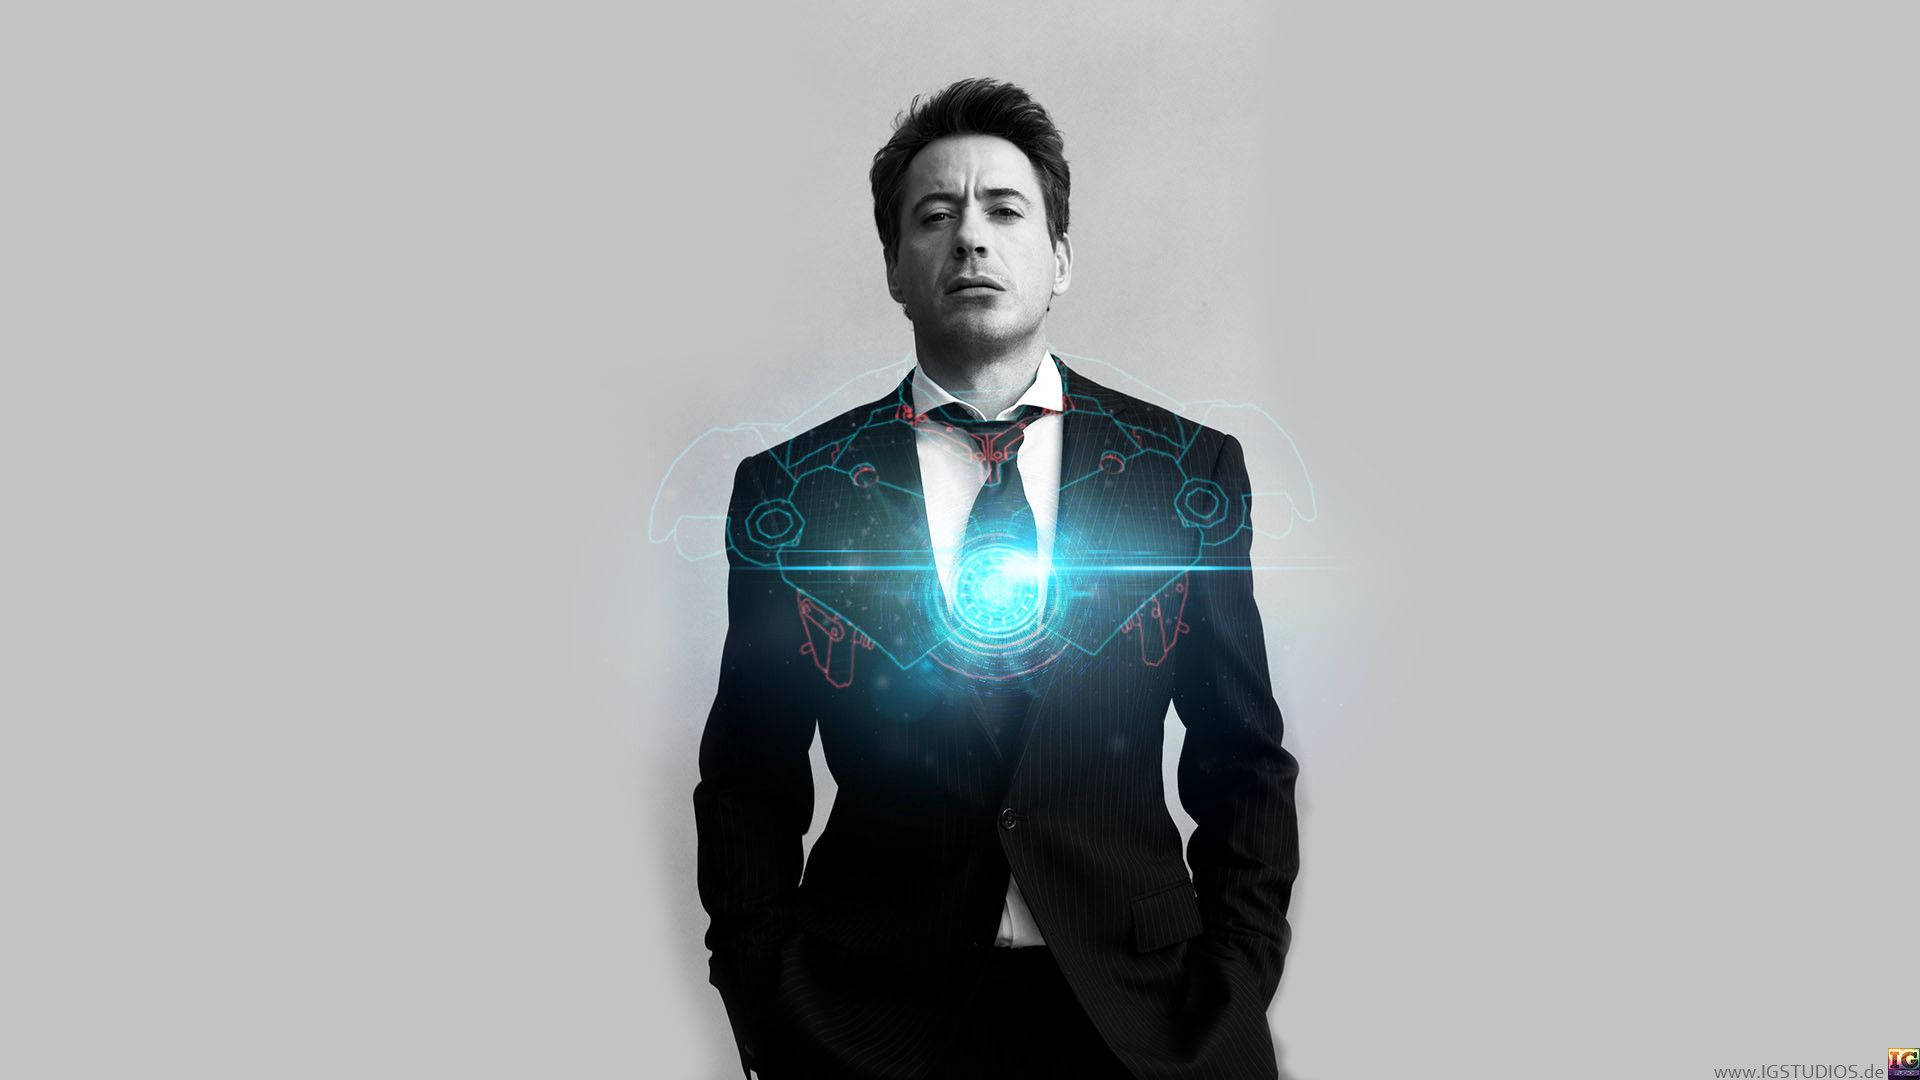 Top 999+ Robert Downey Jr Wallpapers Full HD, 4K✅Free to Use